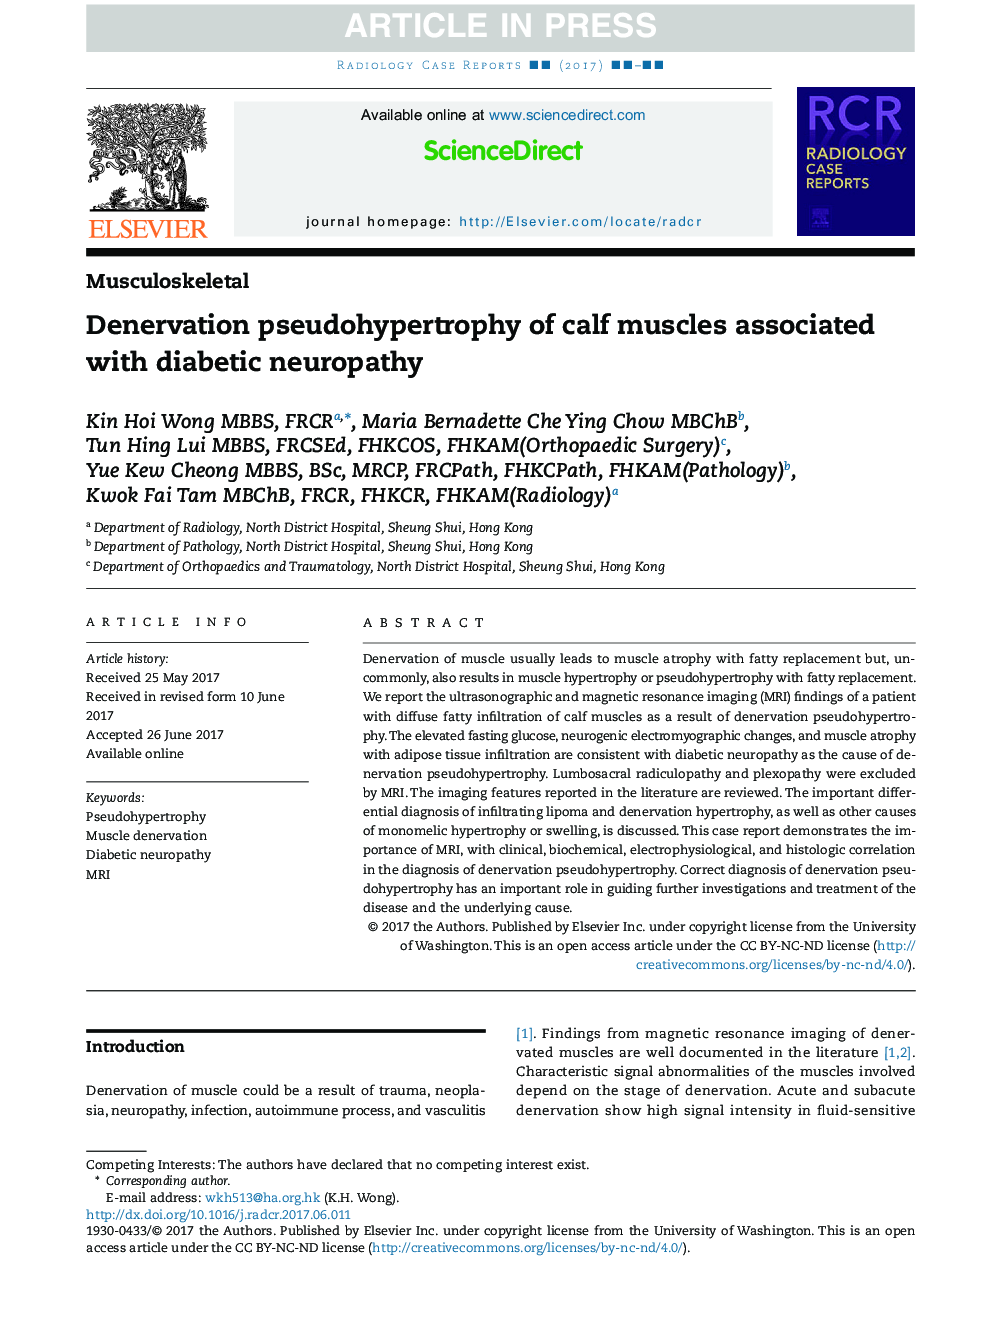 Denervation pseudohypertrophy of calf muscles associated with diabetic neuropathy